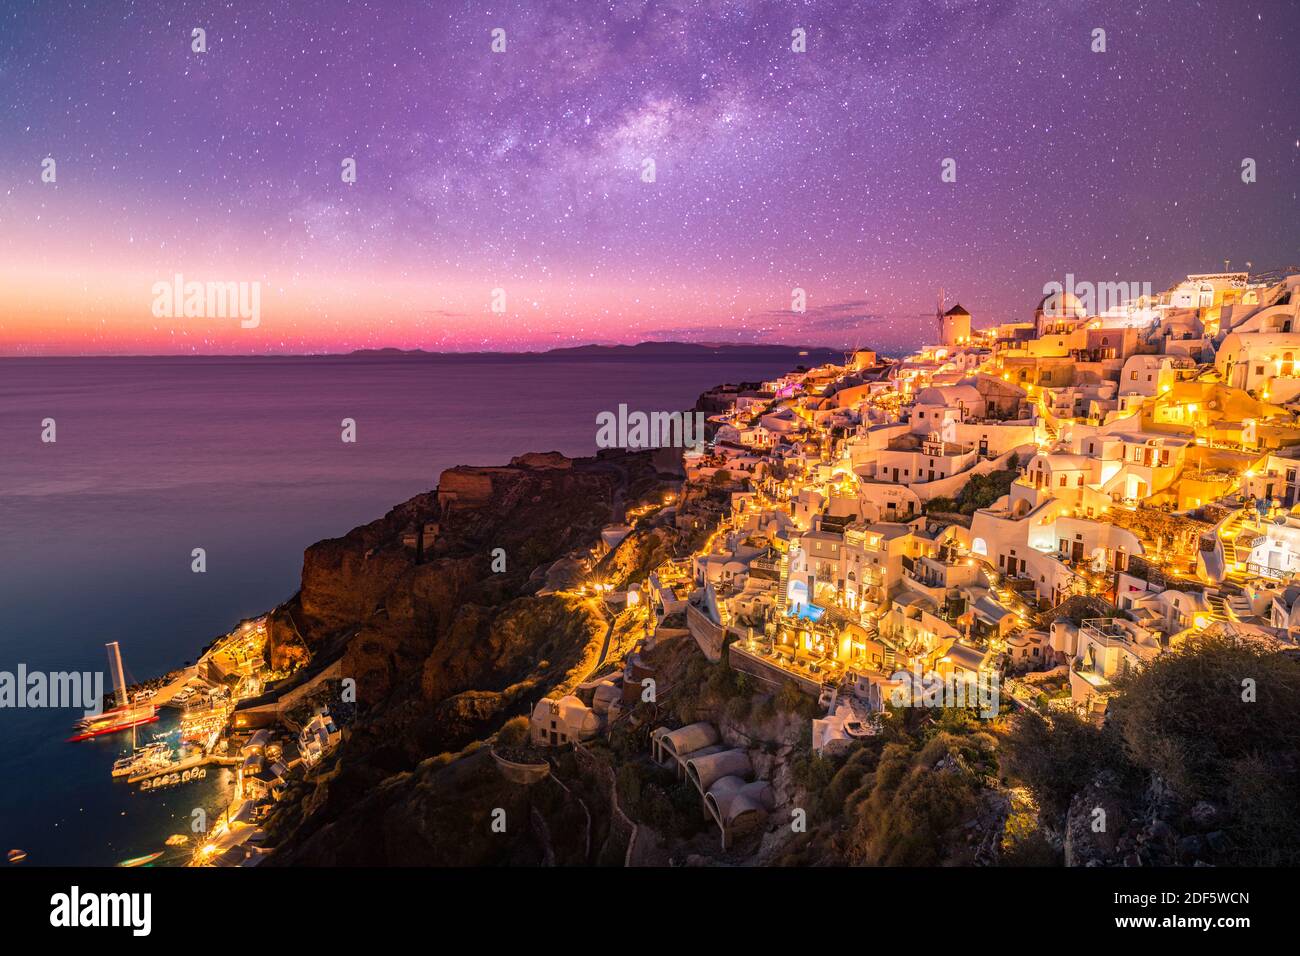 Amazing evening view of Santorini island. Picturesque spring sunset on the famous Fira village, Greece, Europe. Traveling concept background. Artistic Stock Photo